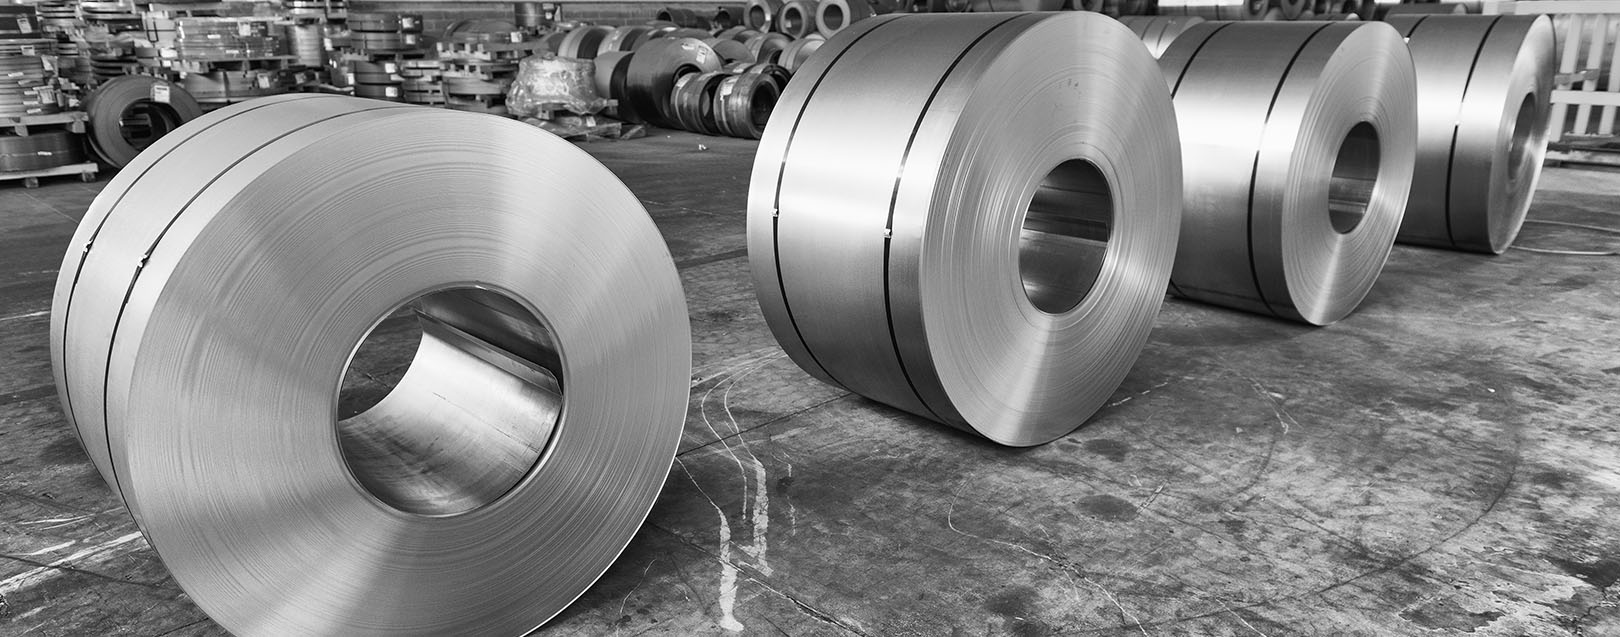 CBEC extends anti-dumping duty on alloy and non-alloy imports for 2 months